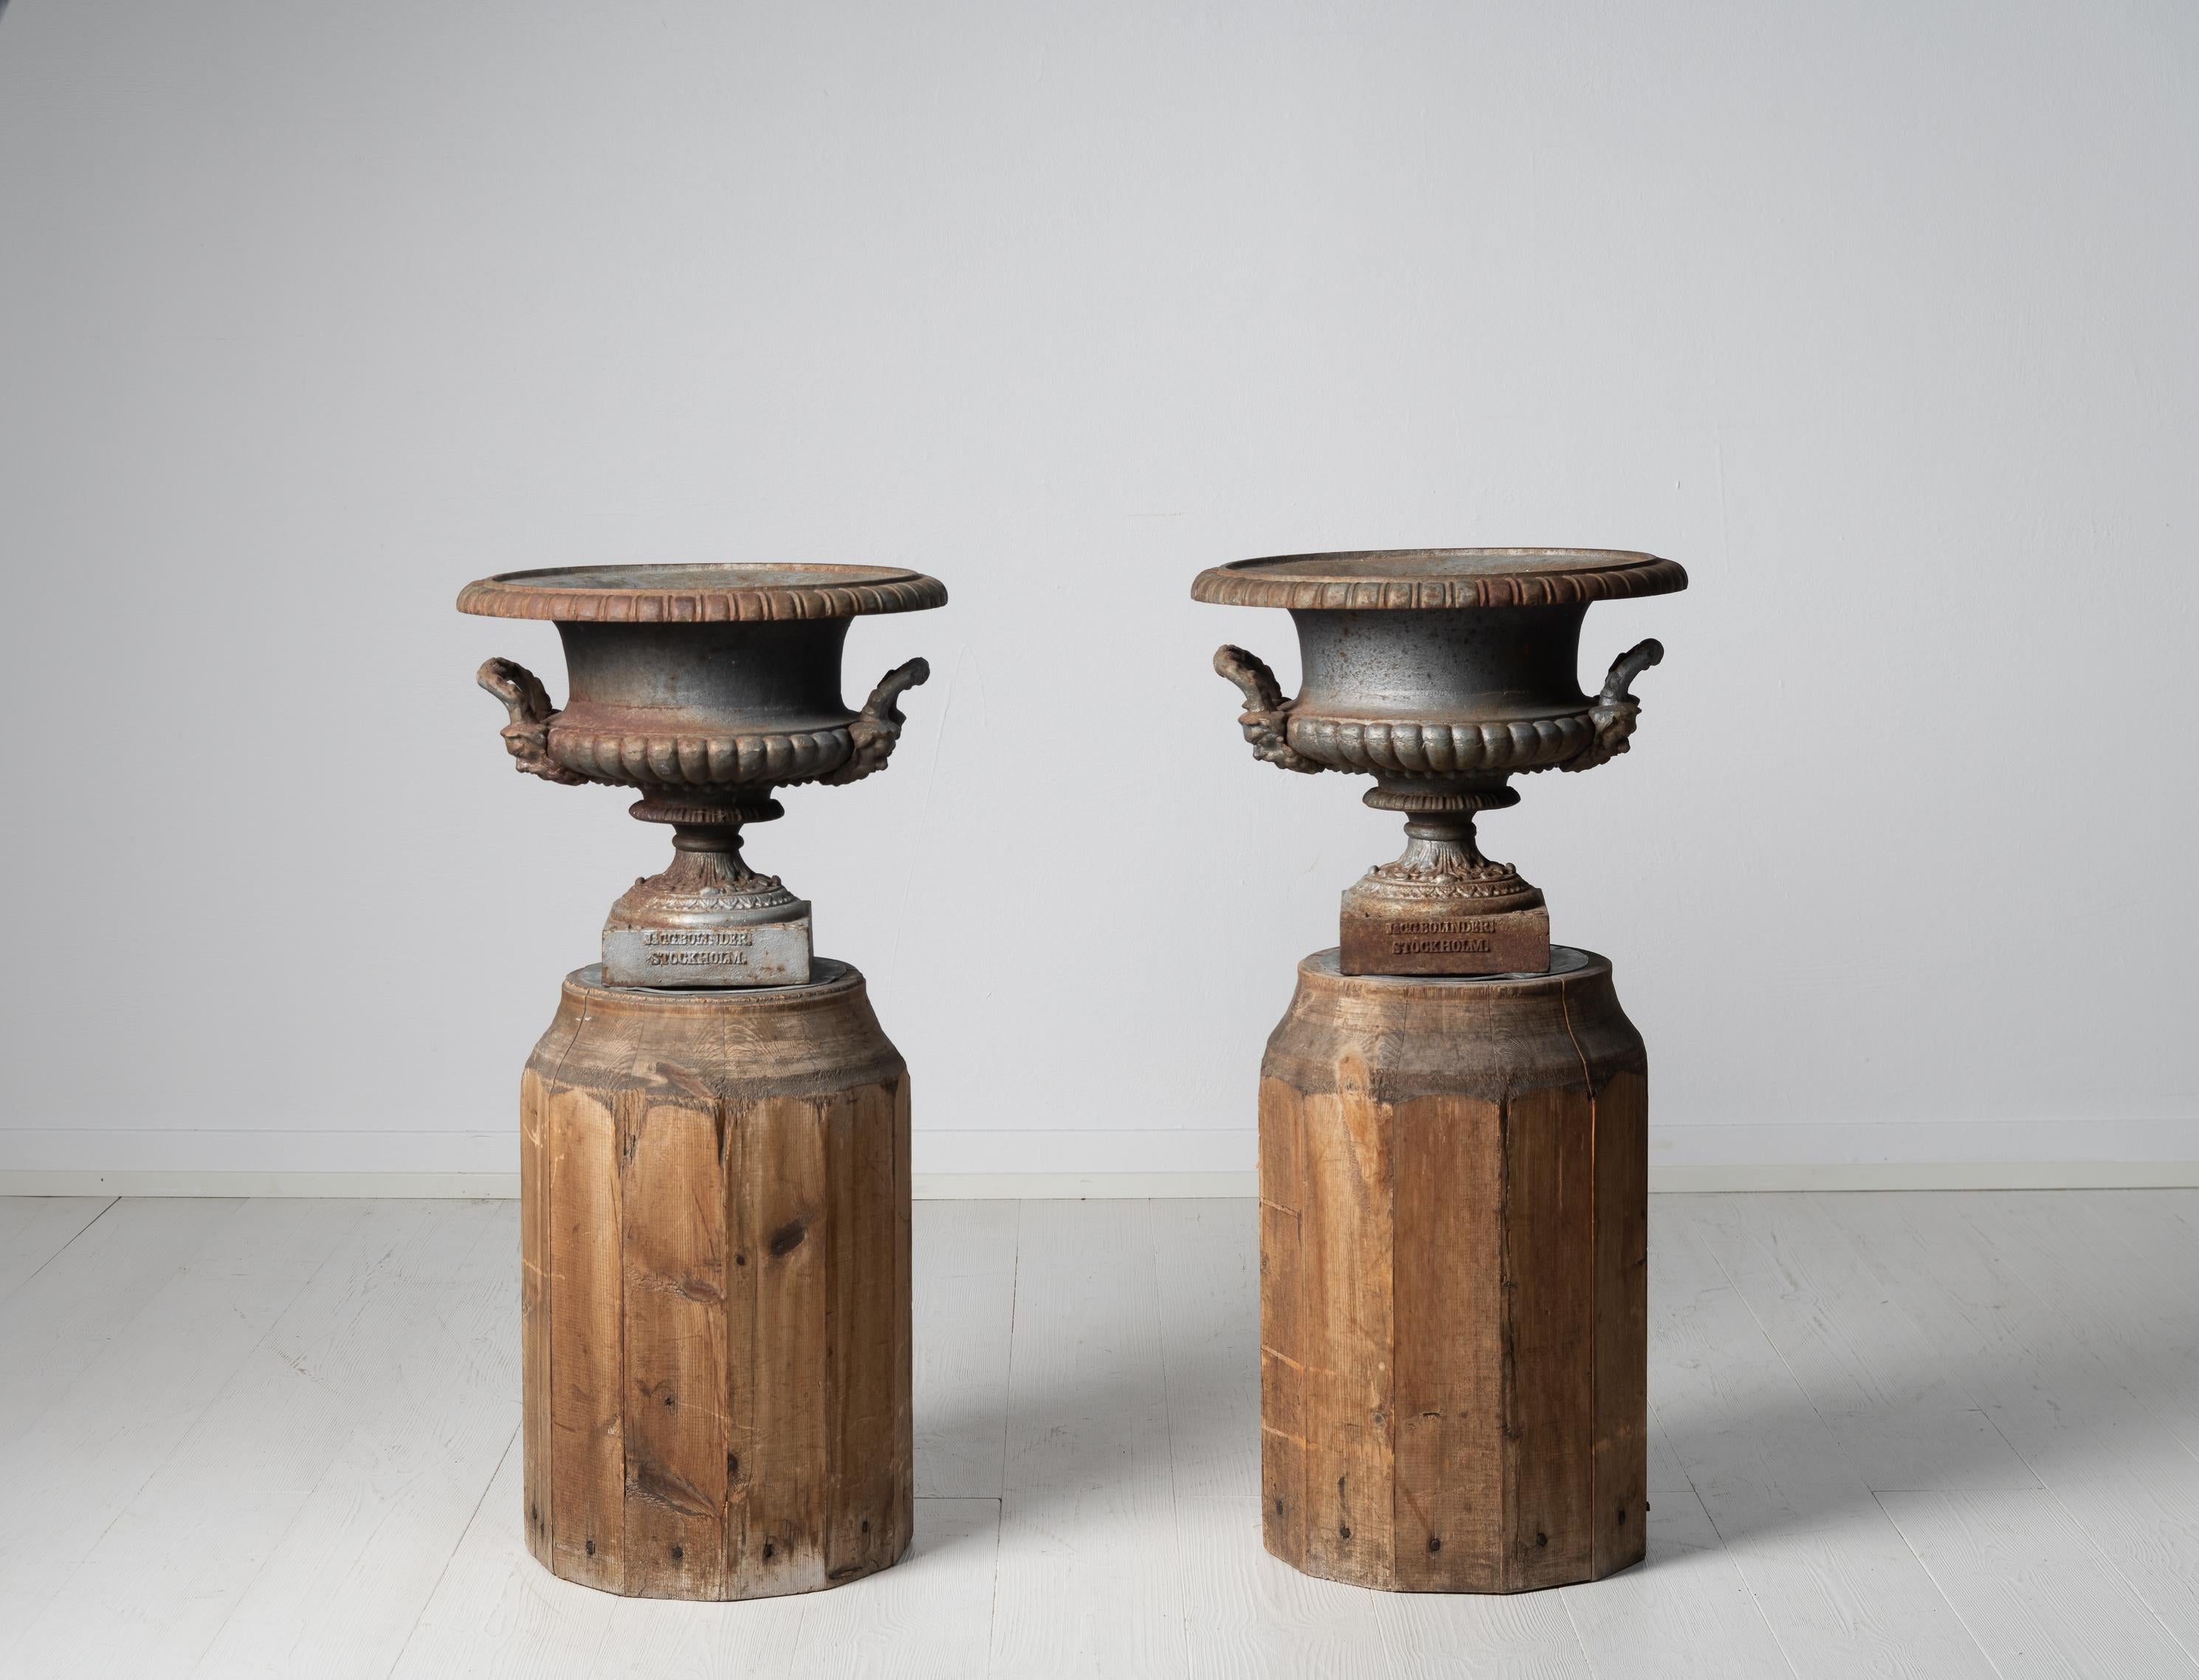 Antique cast iron urns from Sweden made during the late 19th century, around 1870. The garden urns are the classic medicine shape with handles at the sides. Marked “J. & C.G. Bolinder Stockholm” and N:16 on the feet. The urns are in untouched